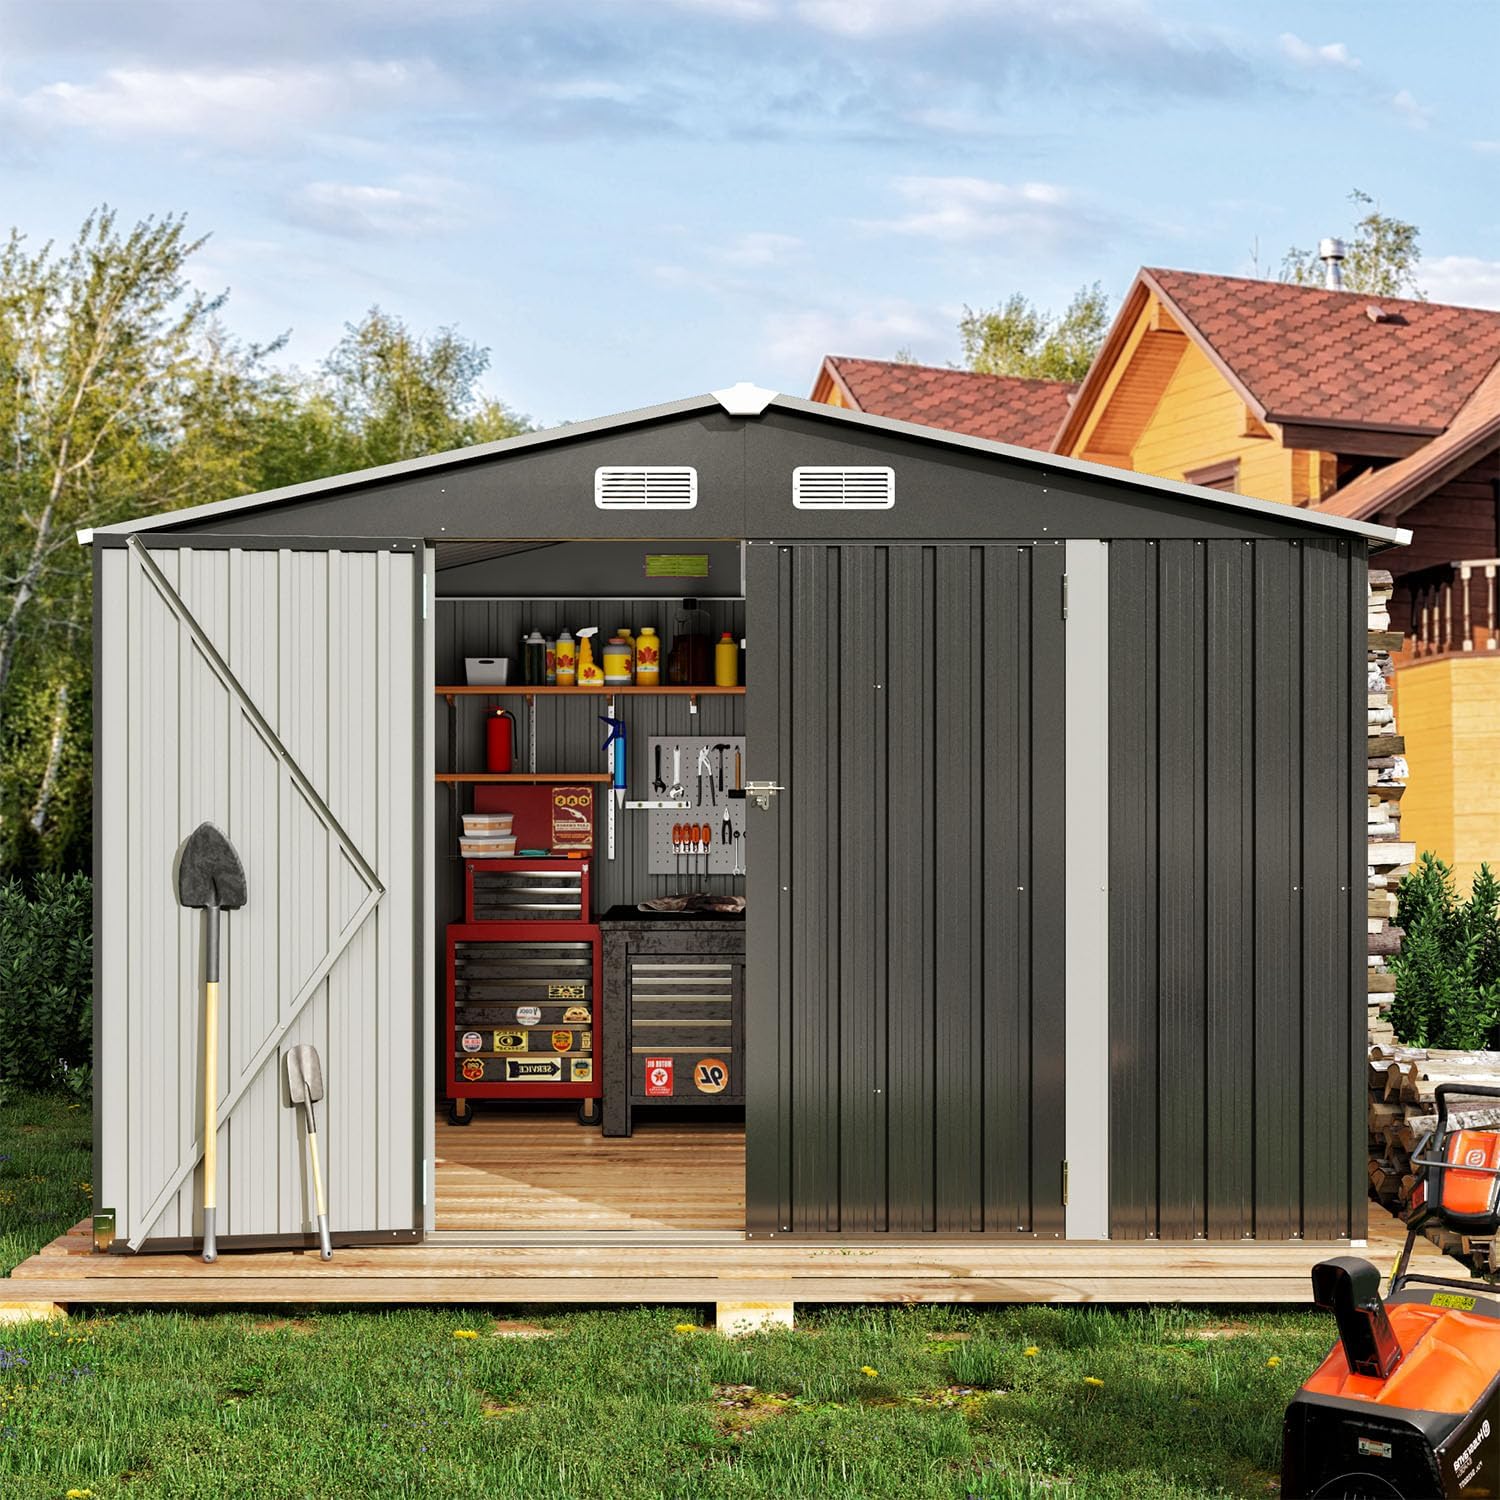 9.6 x 7.8 FT Metal Utility Tool Shed, Steel Storage Shed with Air Vent & Lockable Doors, Black